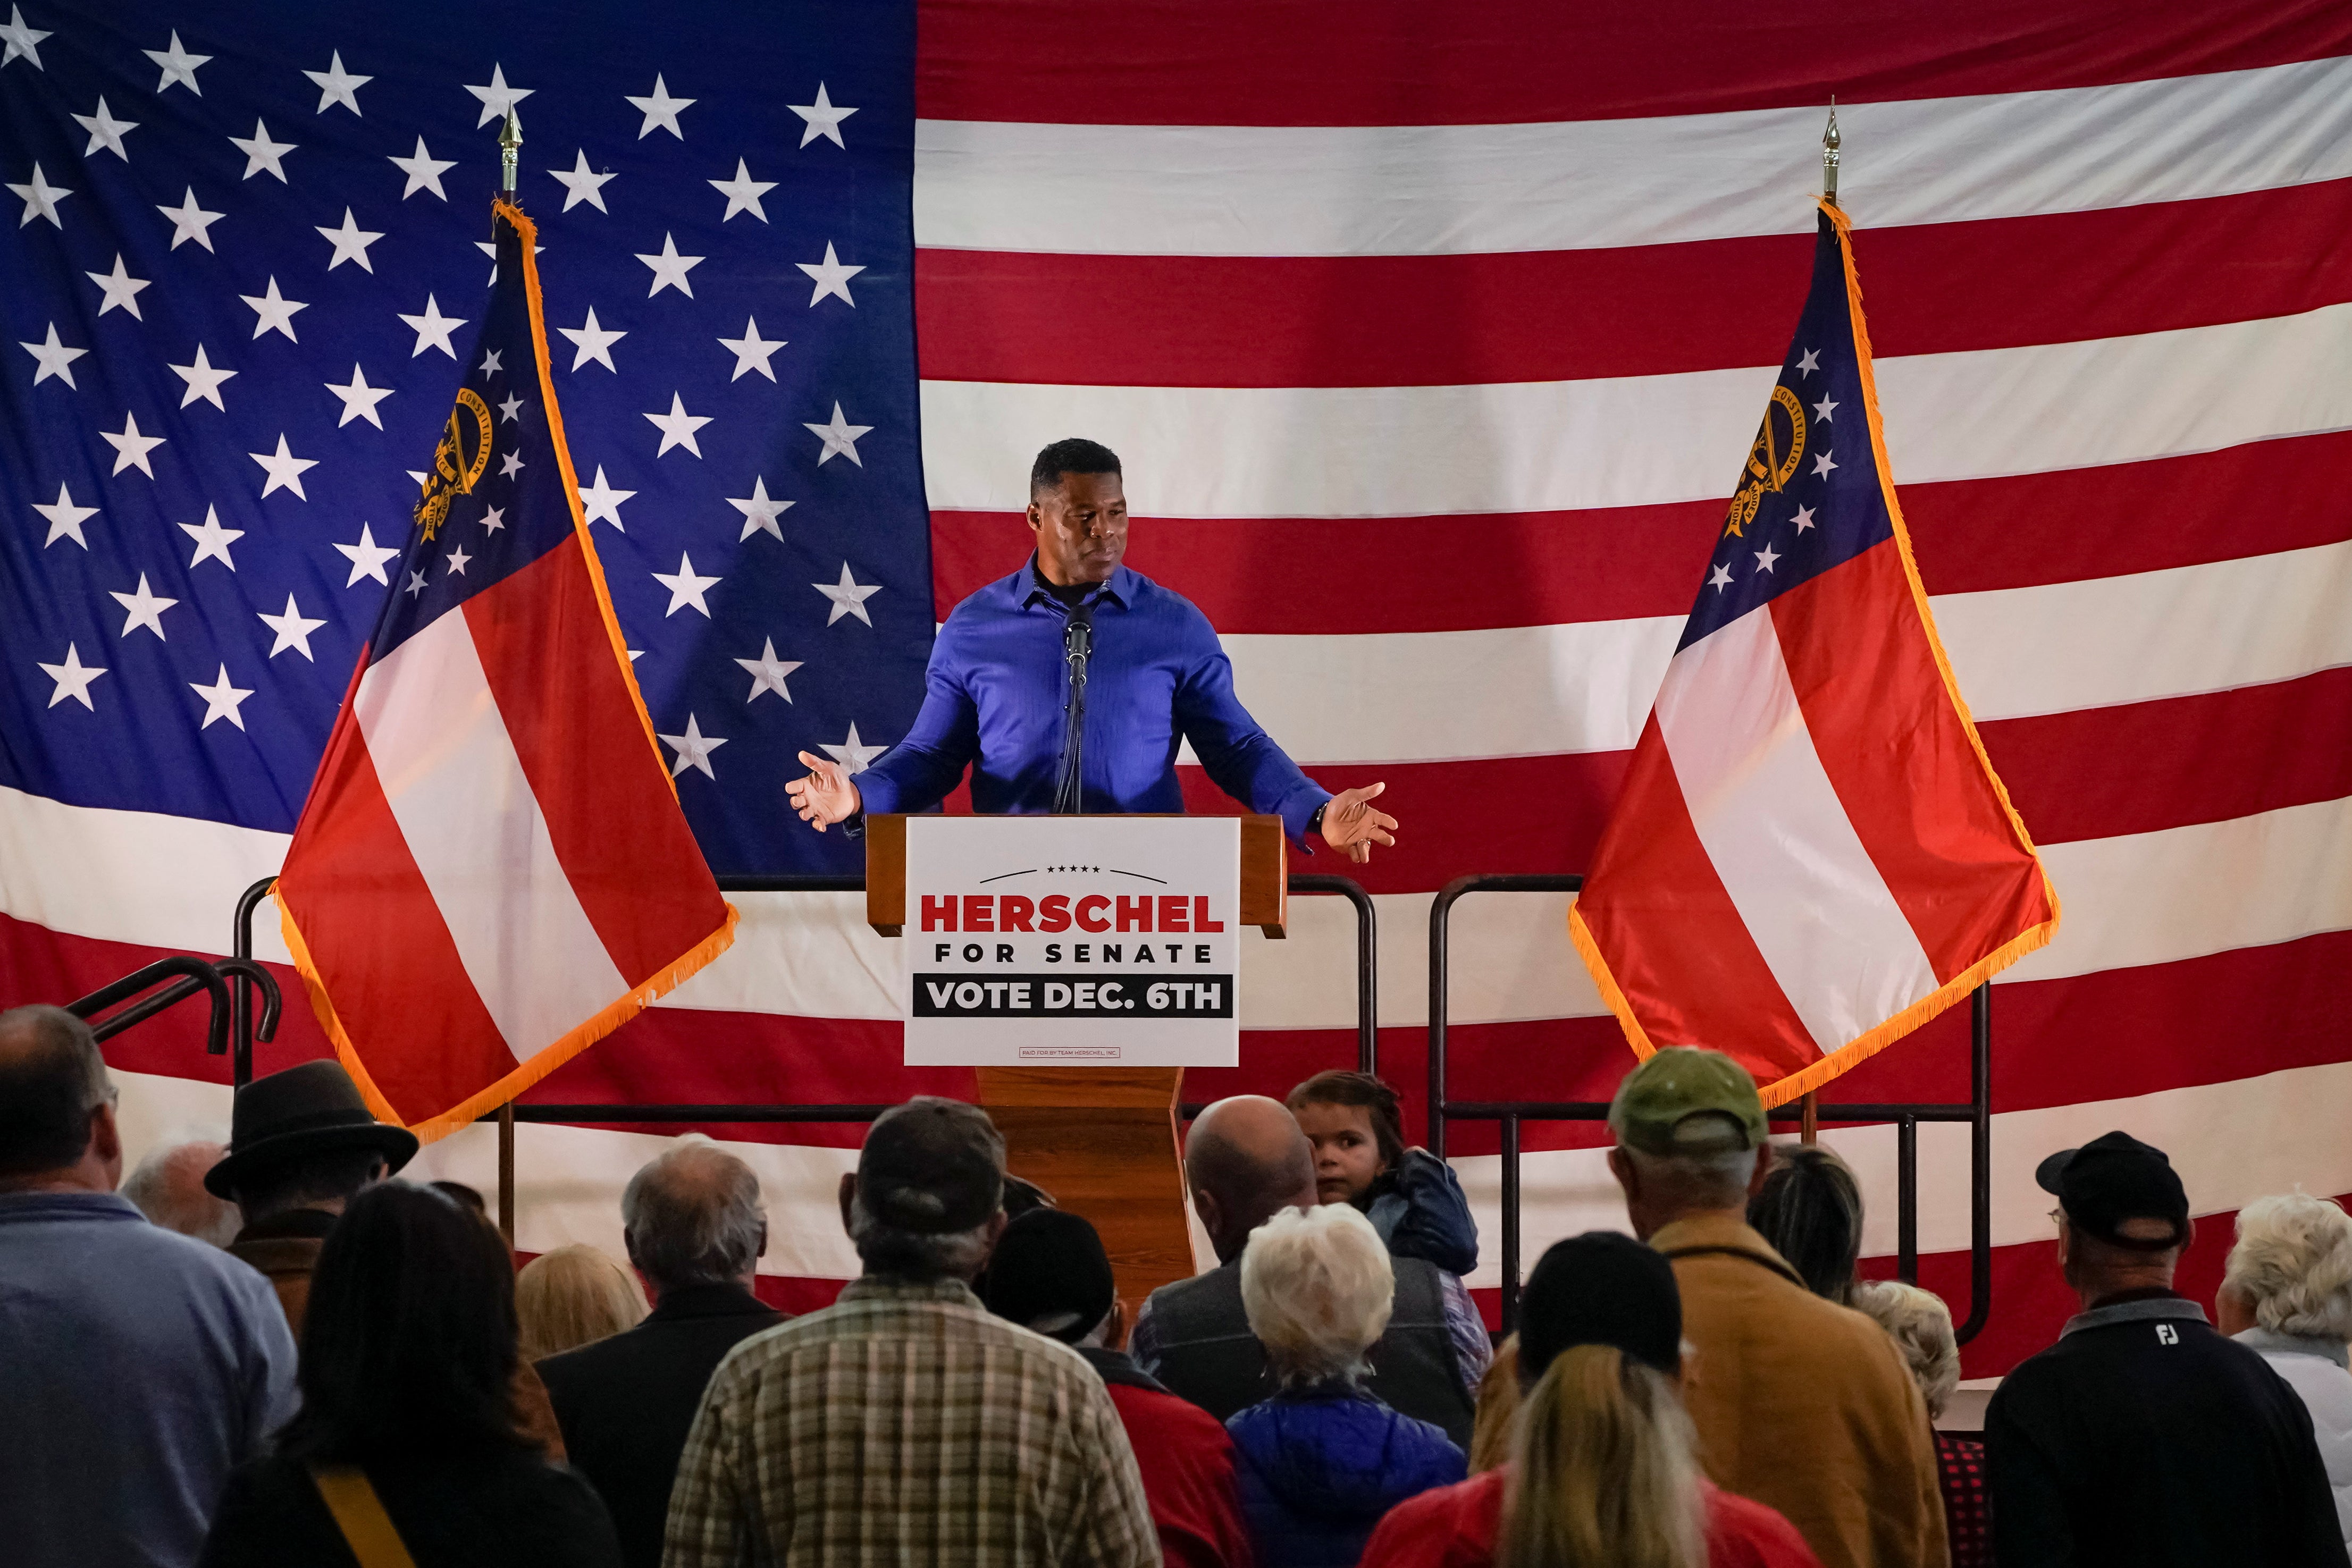 A man addresses a crowd, with an American flag behind him.